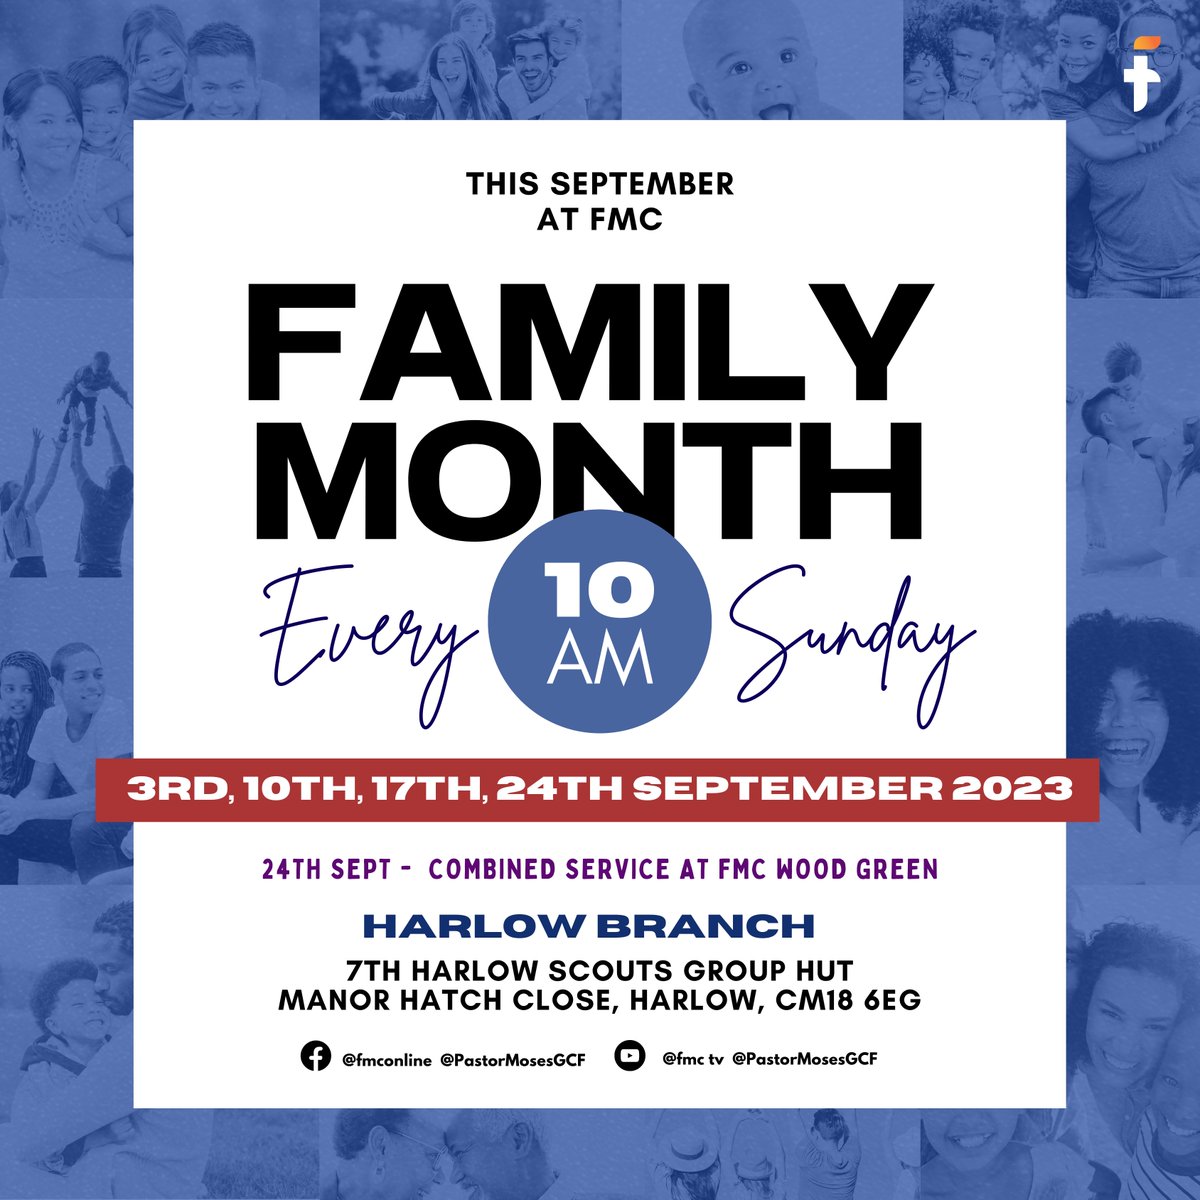 Family month 2023 begins this Sunday and it is happening throughout the month of September. Get excited and be prepared for all the activities lined up as we build a stronger kingdom family together! #FamilyMonth #FMC